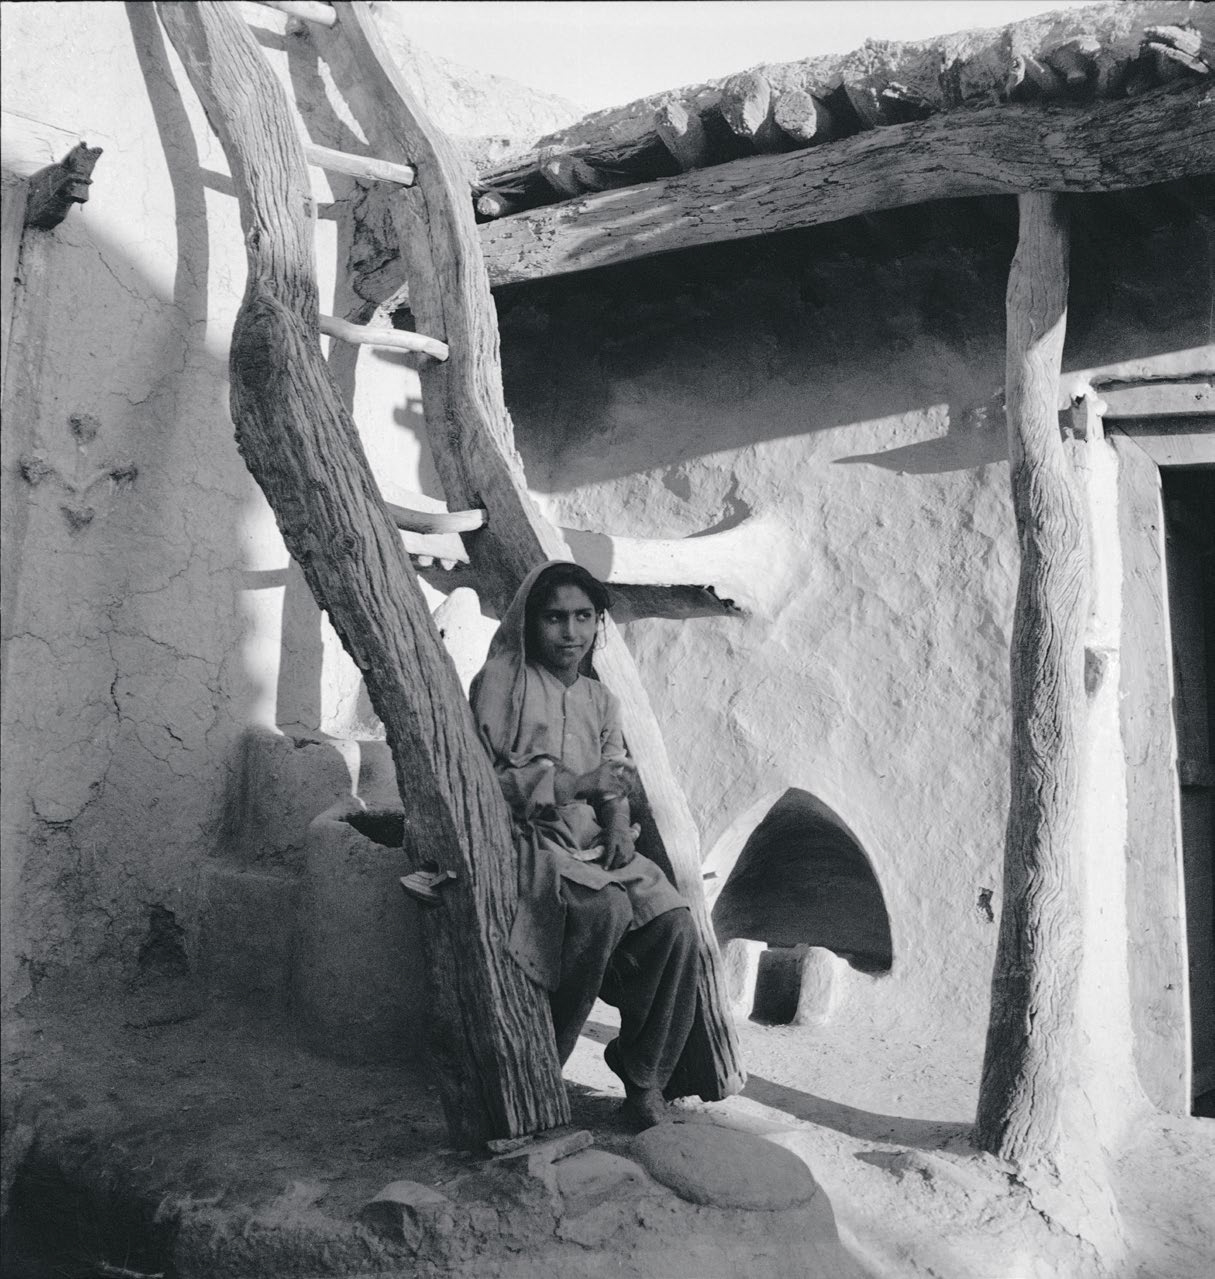 Chandigarh area, young woman sitting on a wooden ladder outside the veranda. In the upper-left corner a wall relief decoration and a tiny wooden sculpture.